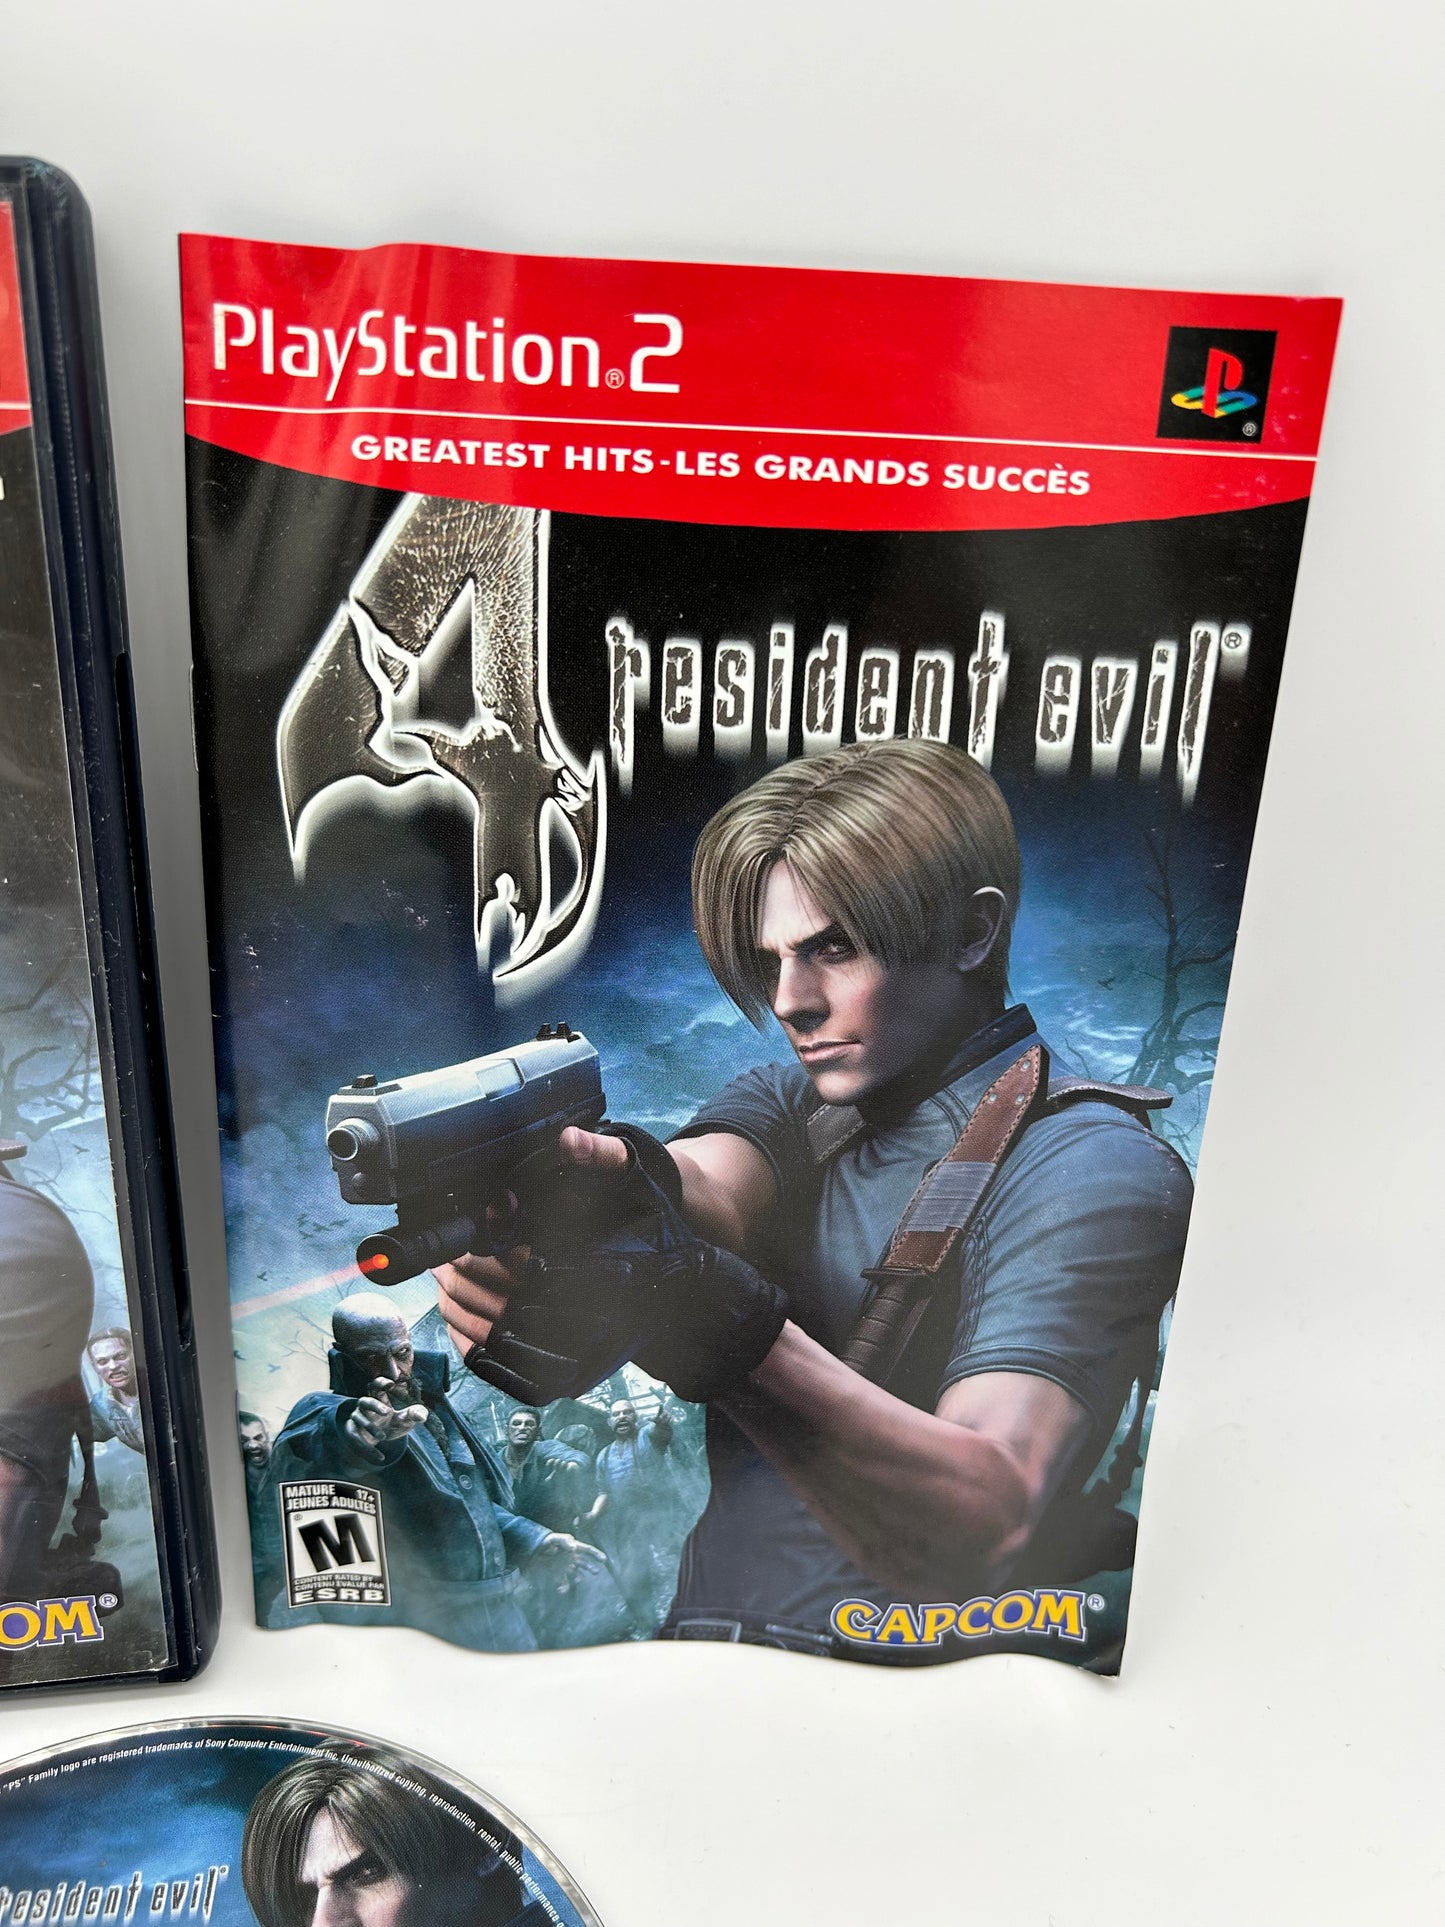 SONY PLAYSTATiON 2 [PS2] | RESiDENT EViL 4 | GREATEST HiTS